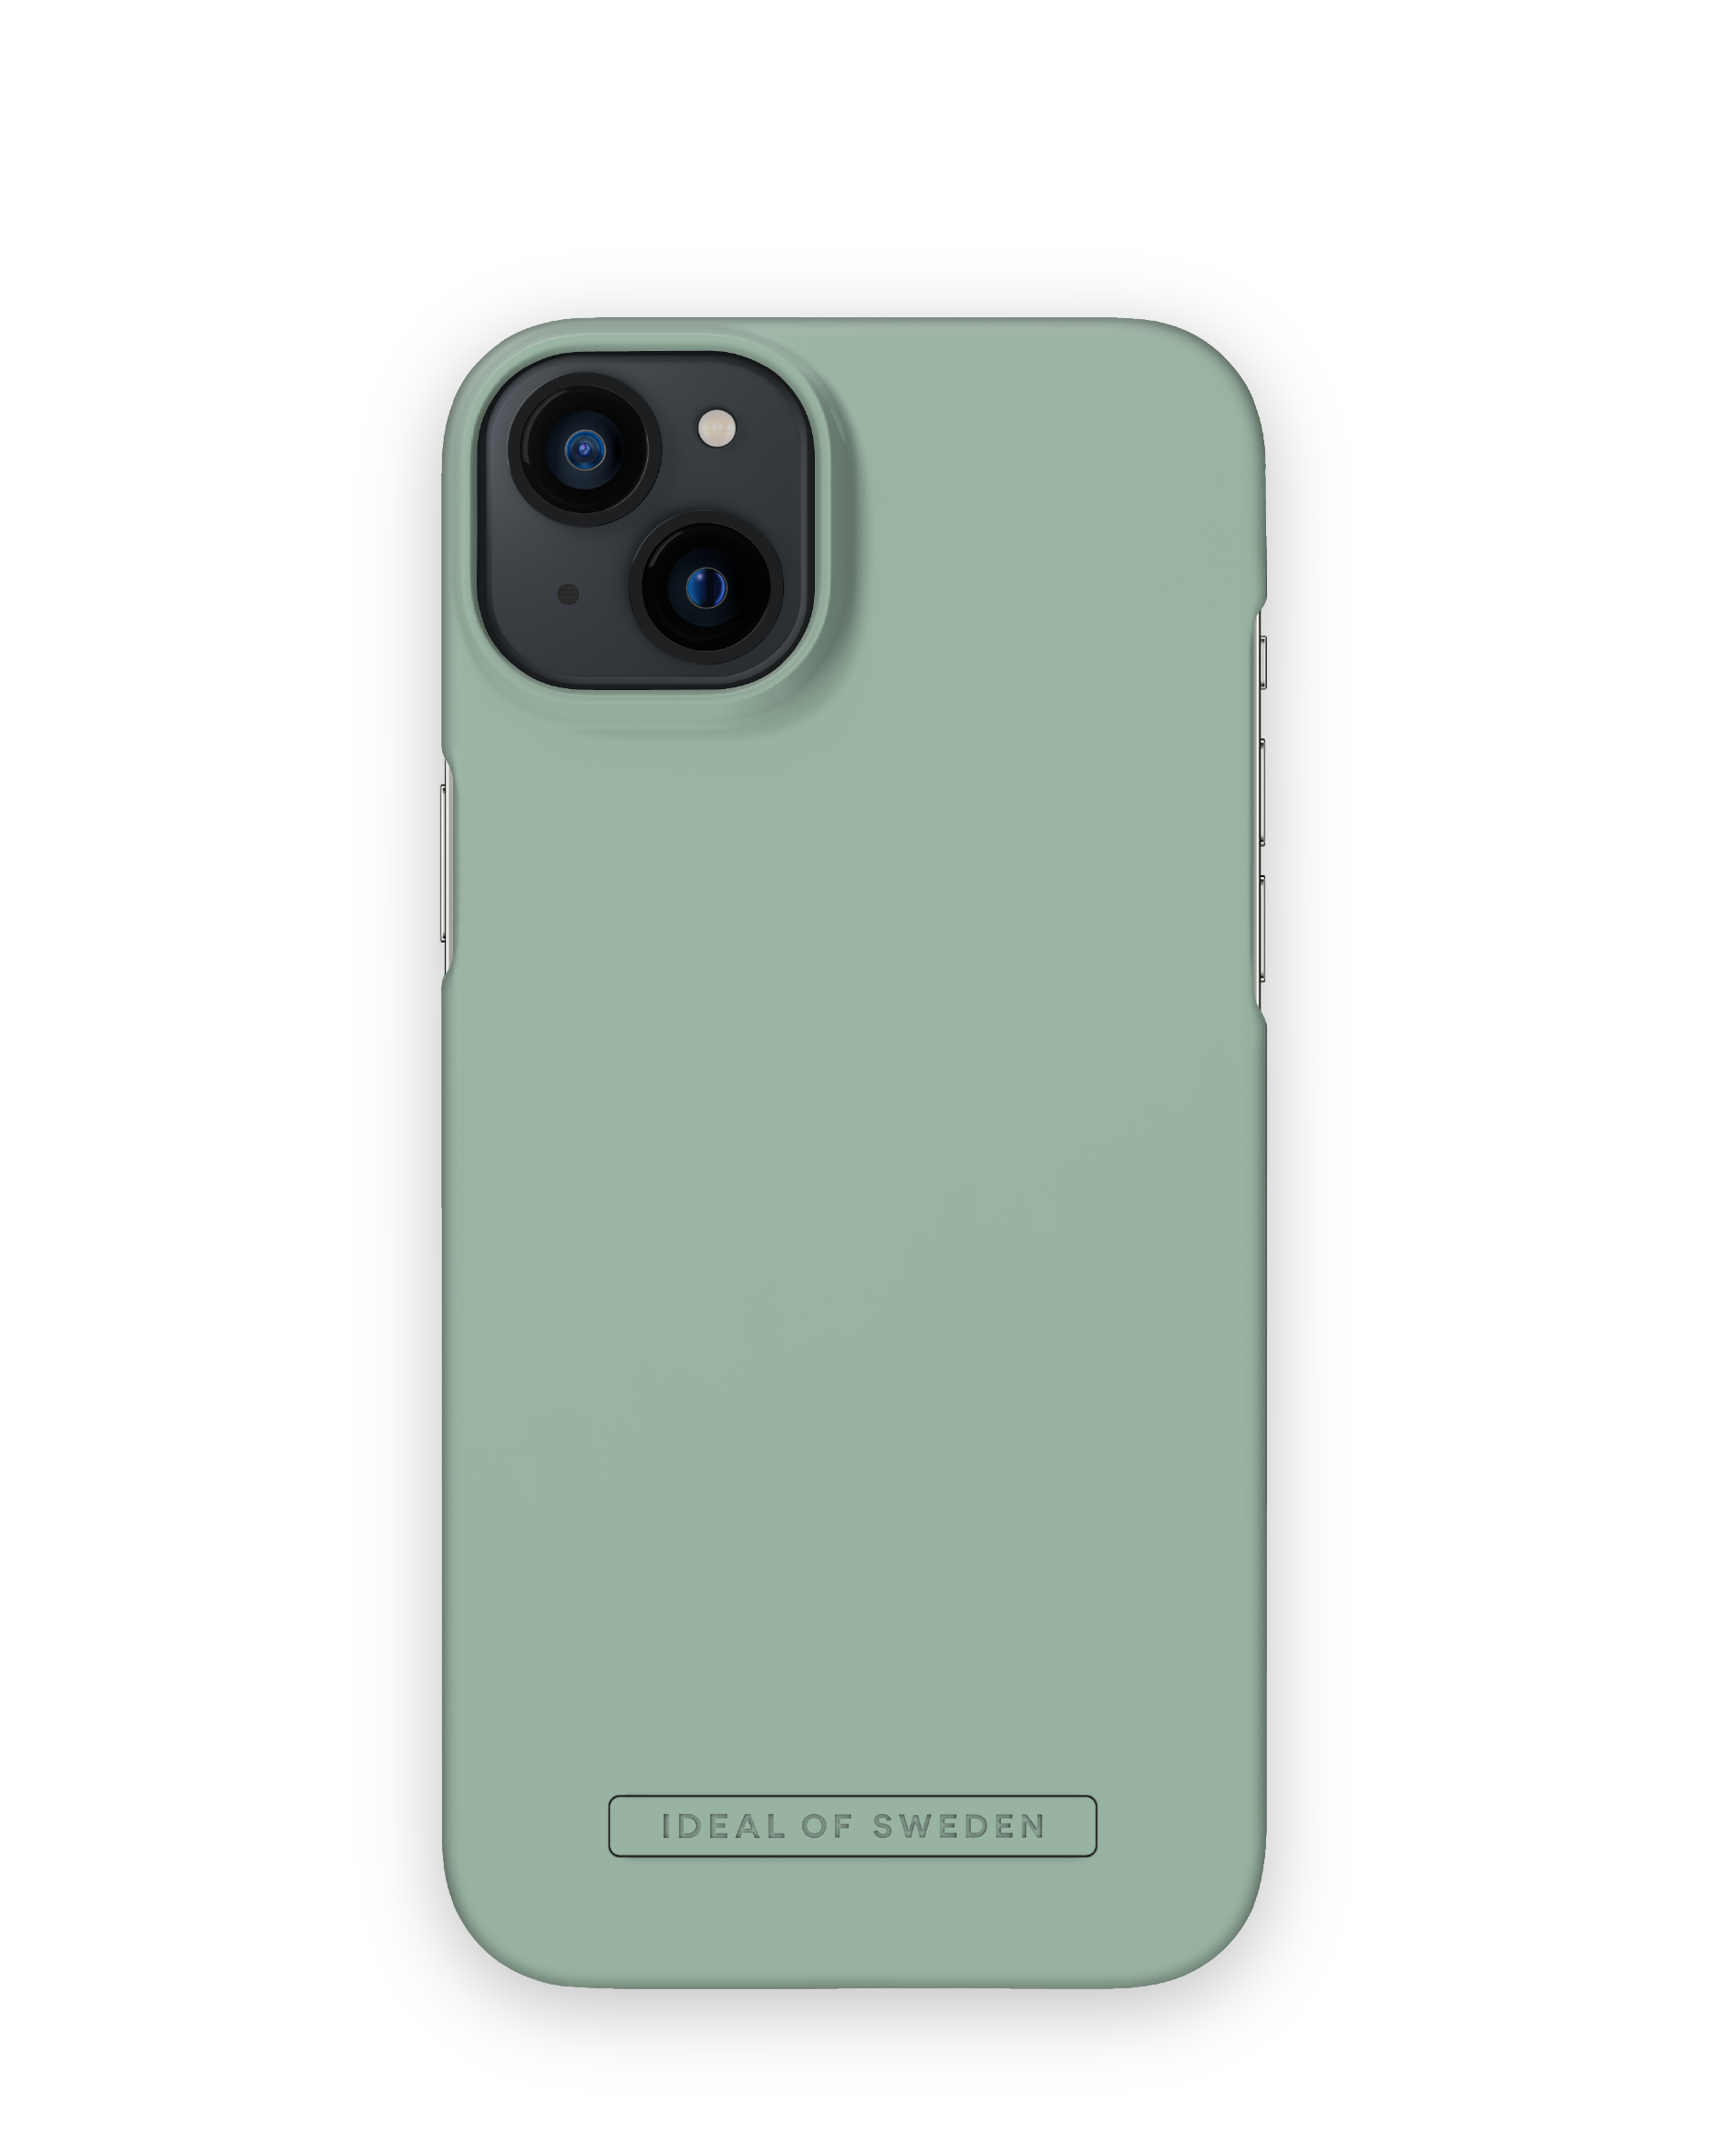 SWEDEN 14 iPhone IDFCSS22-I2267-419, Sage IDEAL Backcover, Plus, Apple, Green OF